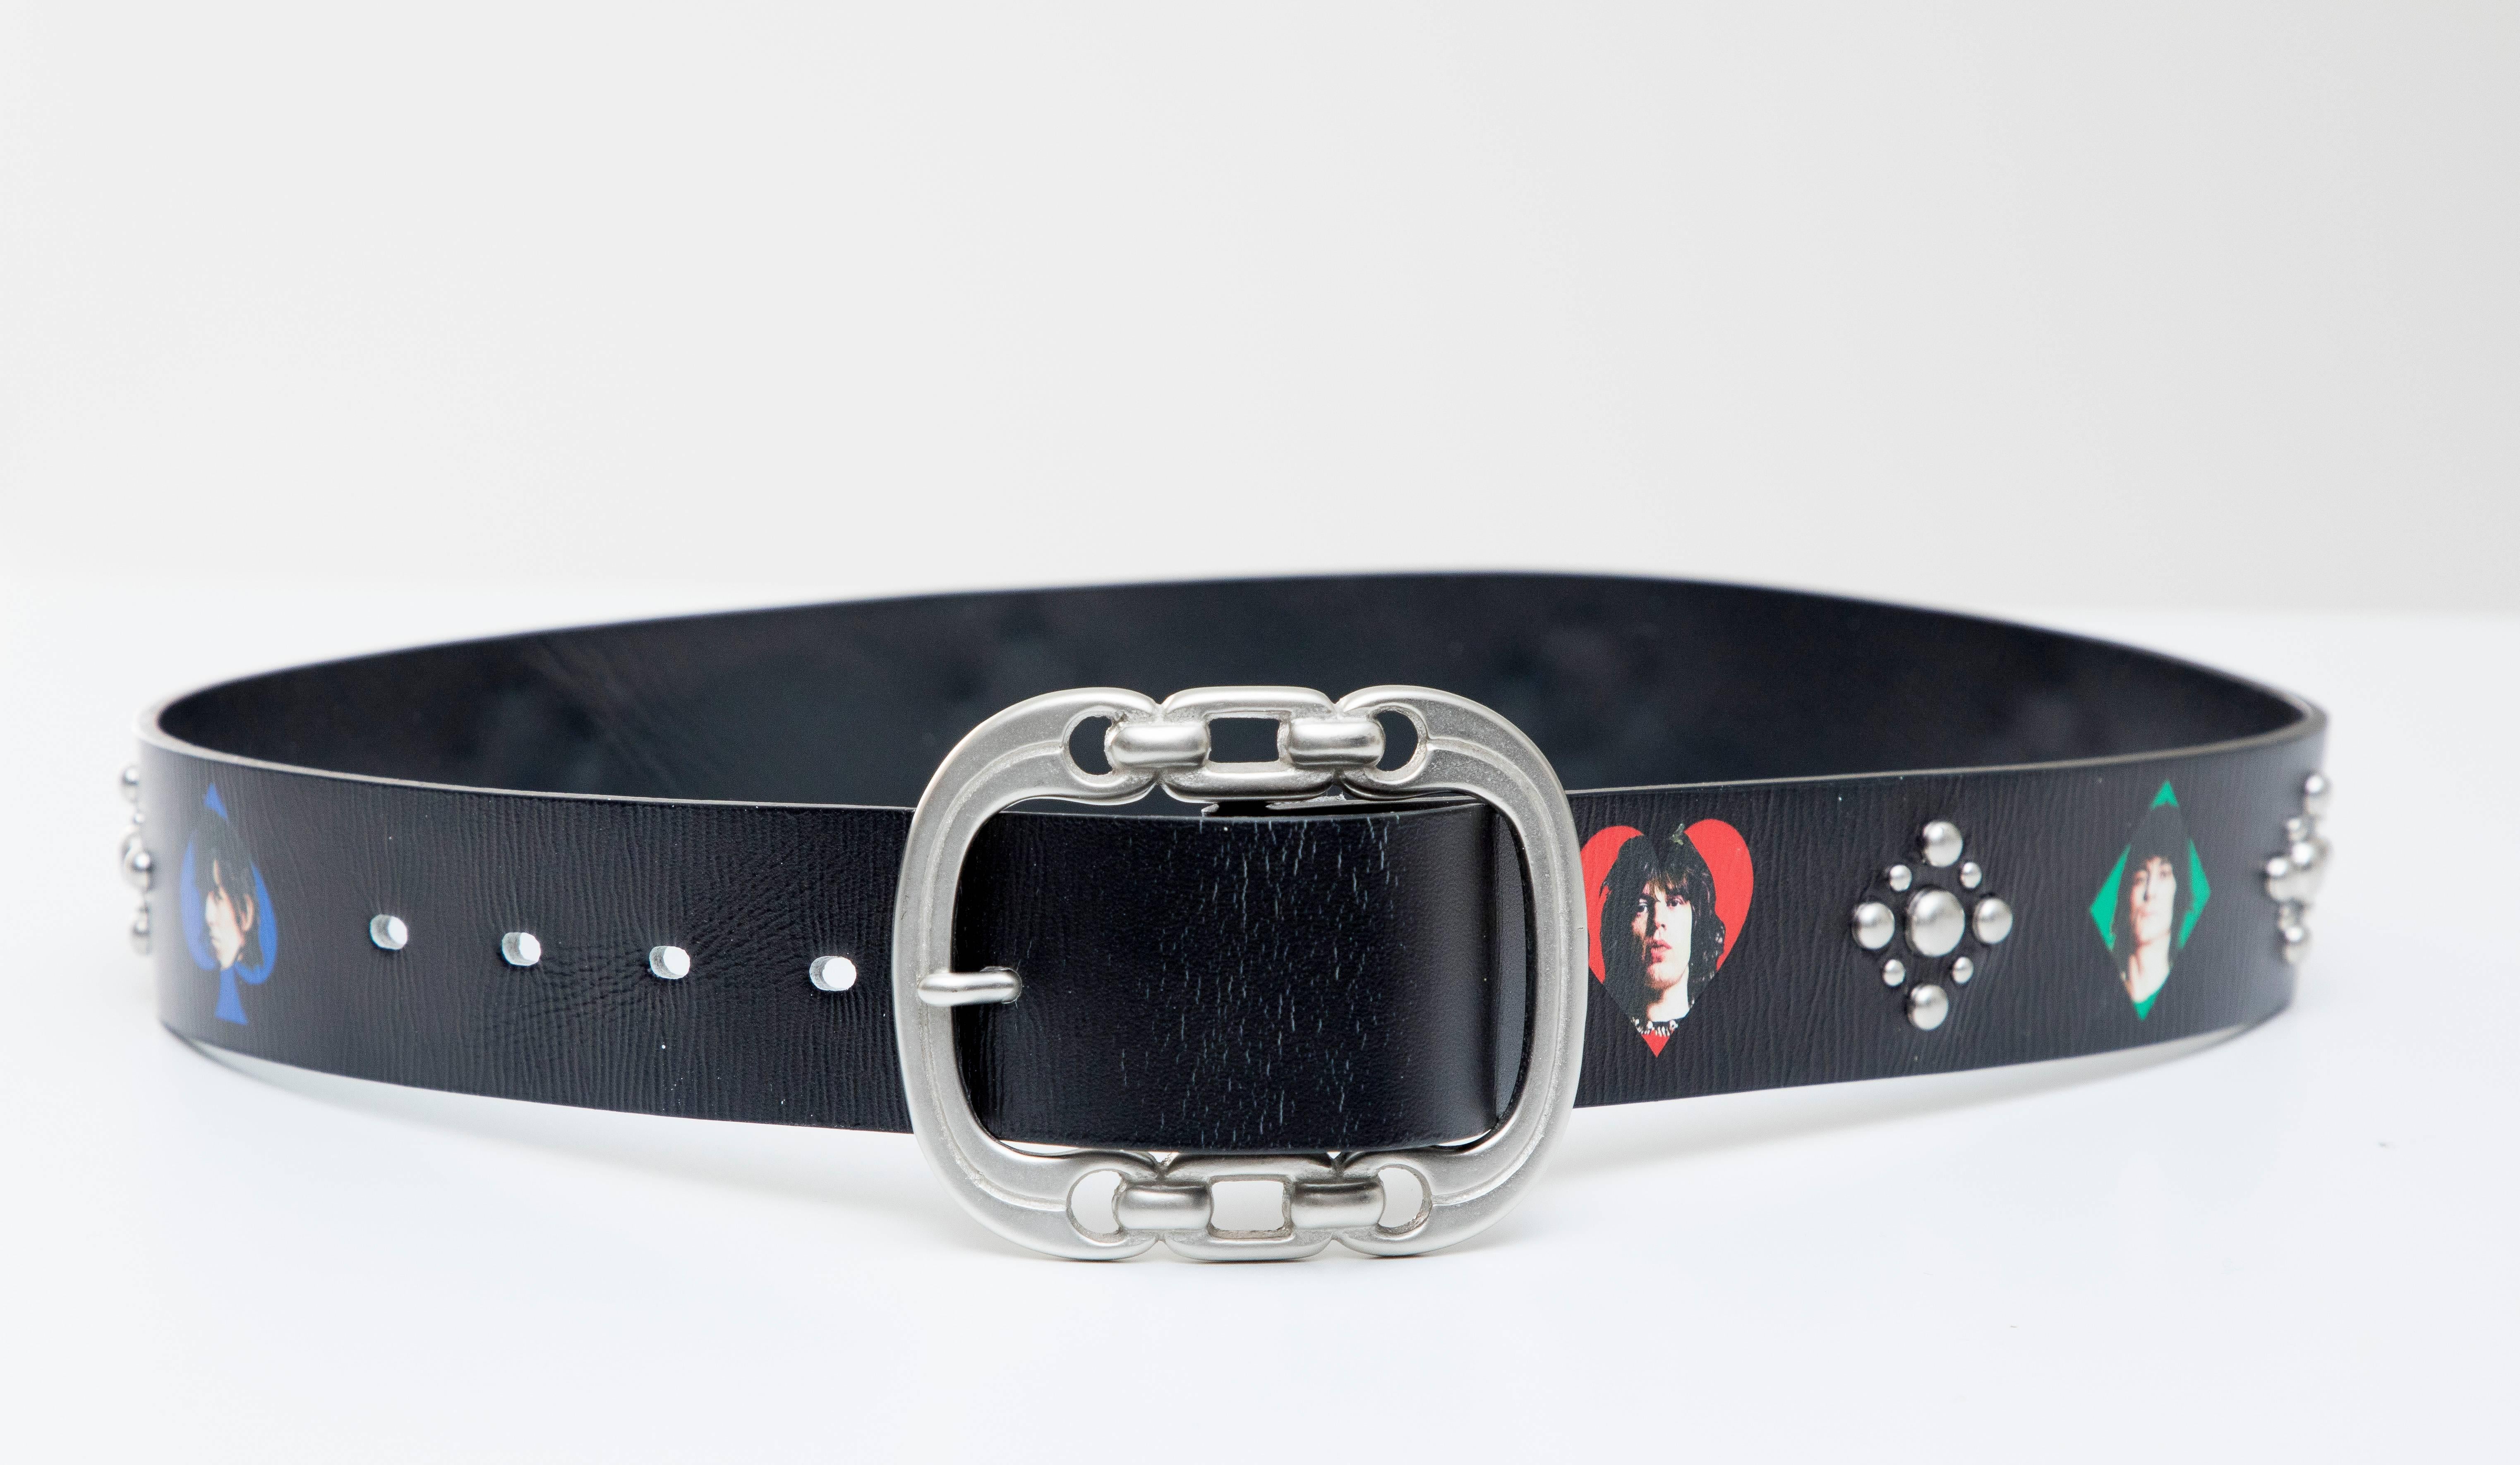 Undercover Jun Takahashi, Spring 2016 black printed and studded leather belt with matte silver buckle. 

Length Min: 30.25, Length Max: 34, Width: 1.25
